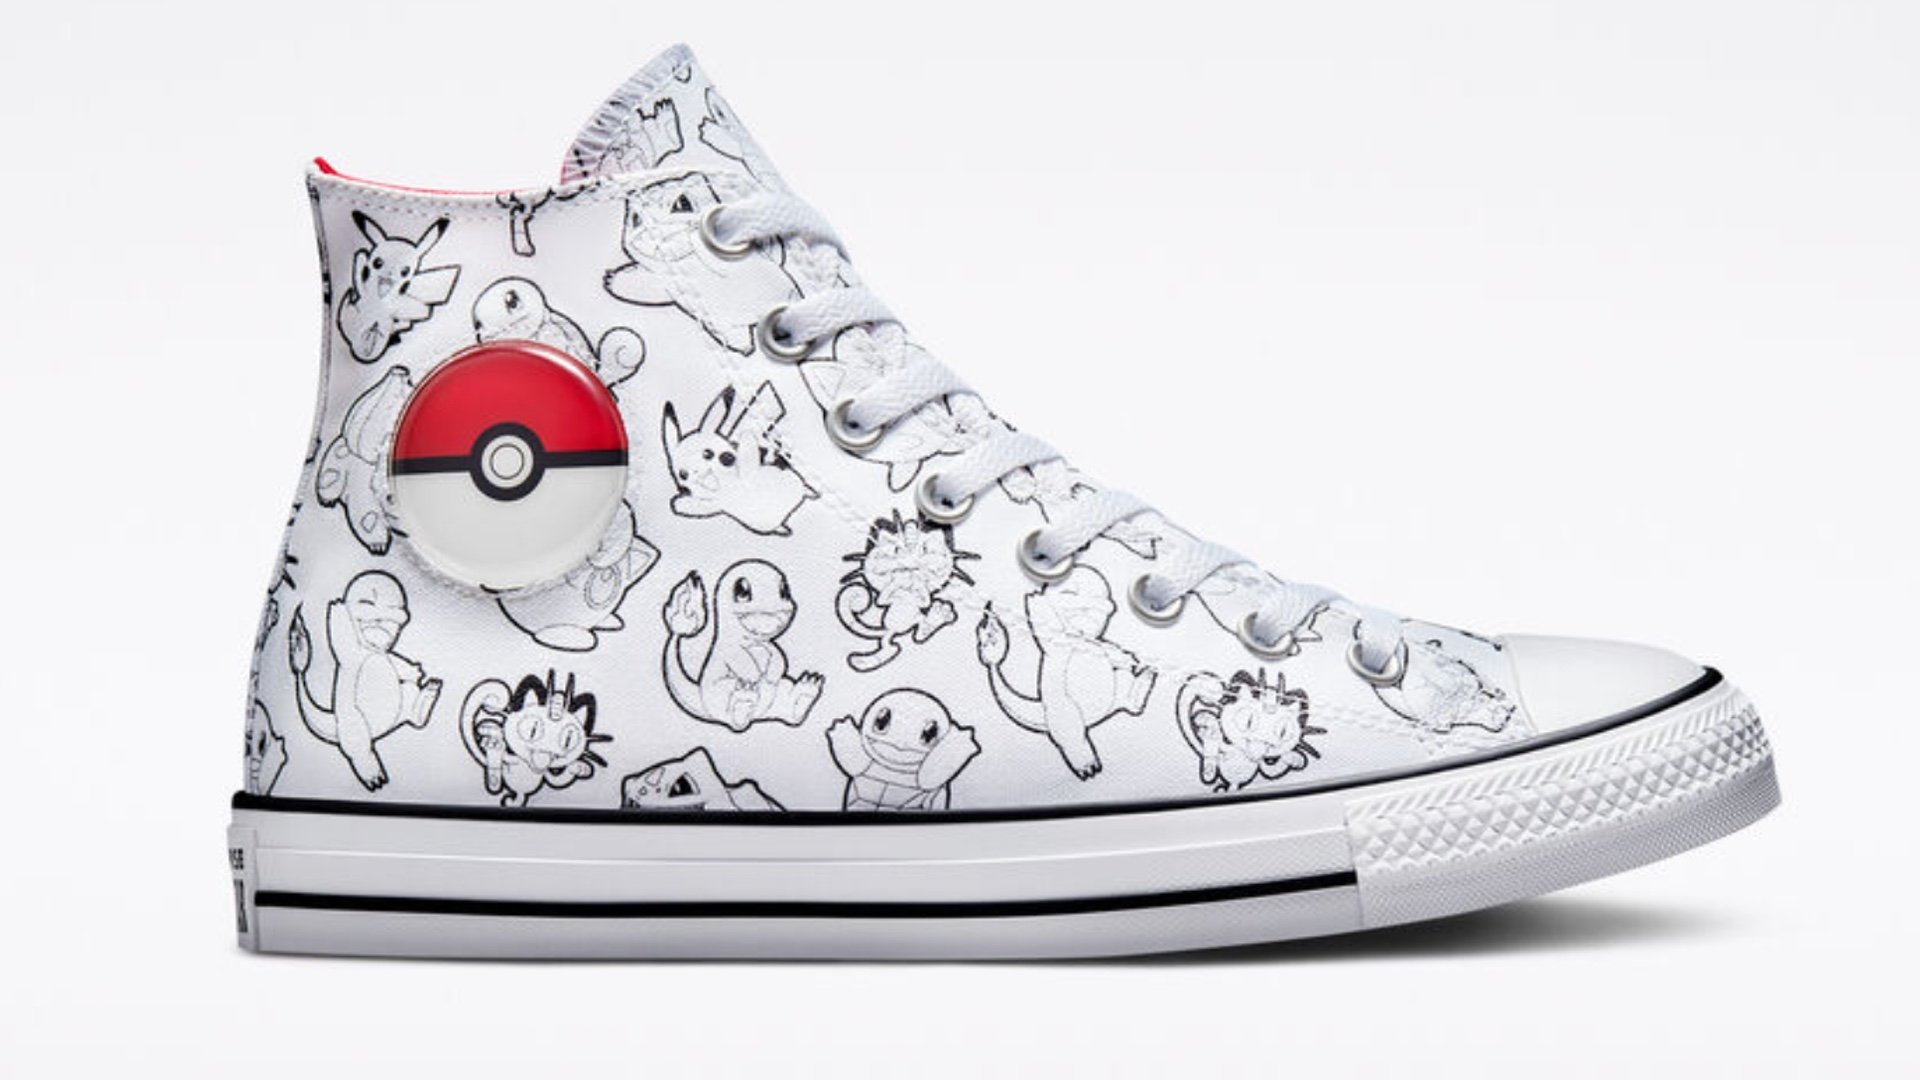 Gotta Catch 'Em All With New POKEMON Converse Shoes — GeekTyrant